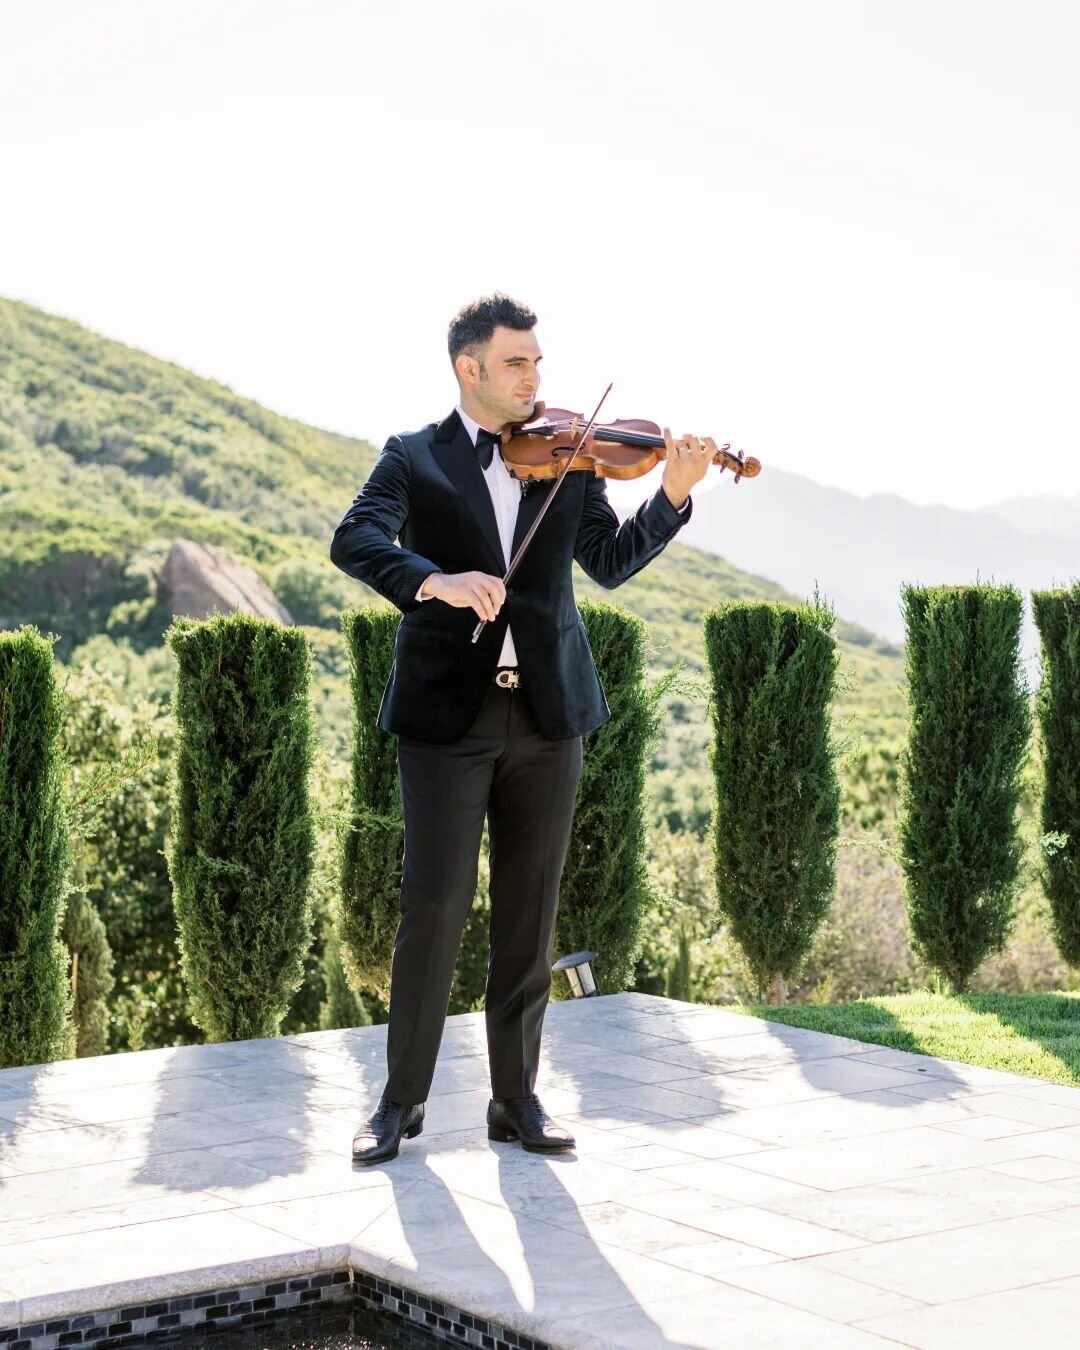 Loved joining this styled shoot at the secluded Stone Mountain Estates in Malibu. 🌳

📸 @christineliphotography
🪄 @notjessaplanner 
.
.
.
#ViolinistAshot
#stonemountainestates #violin #violinist #menswear #mensfashion #magnanni #magnanniman #microw